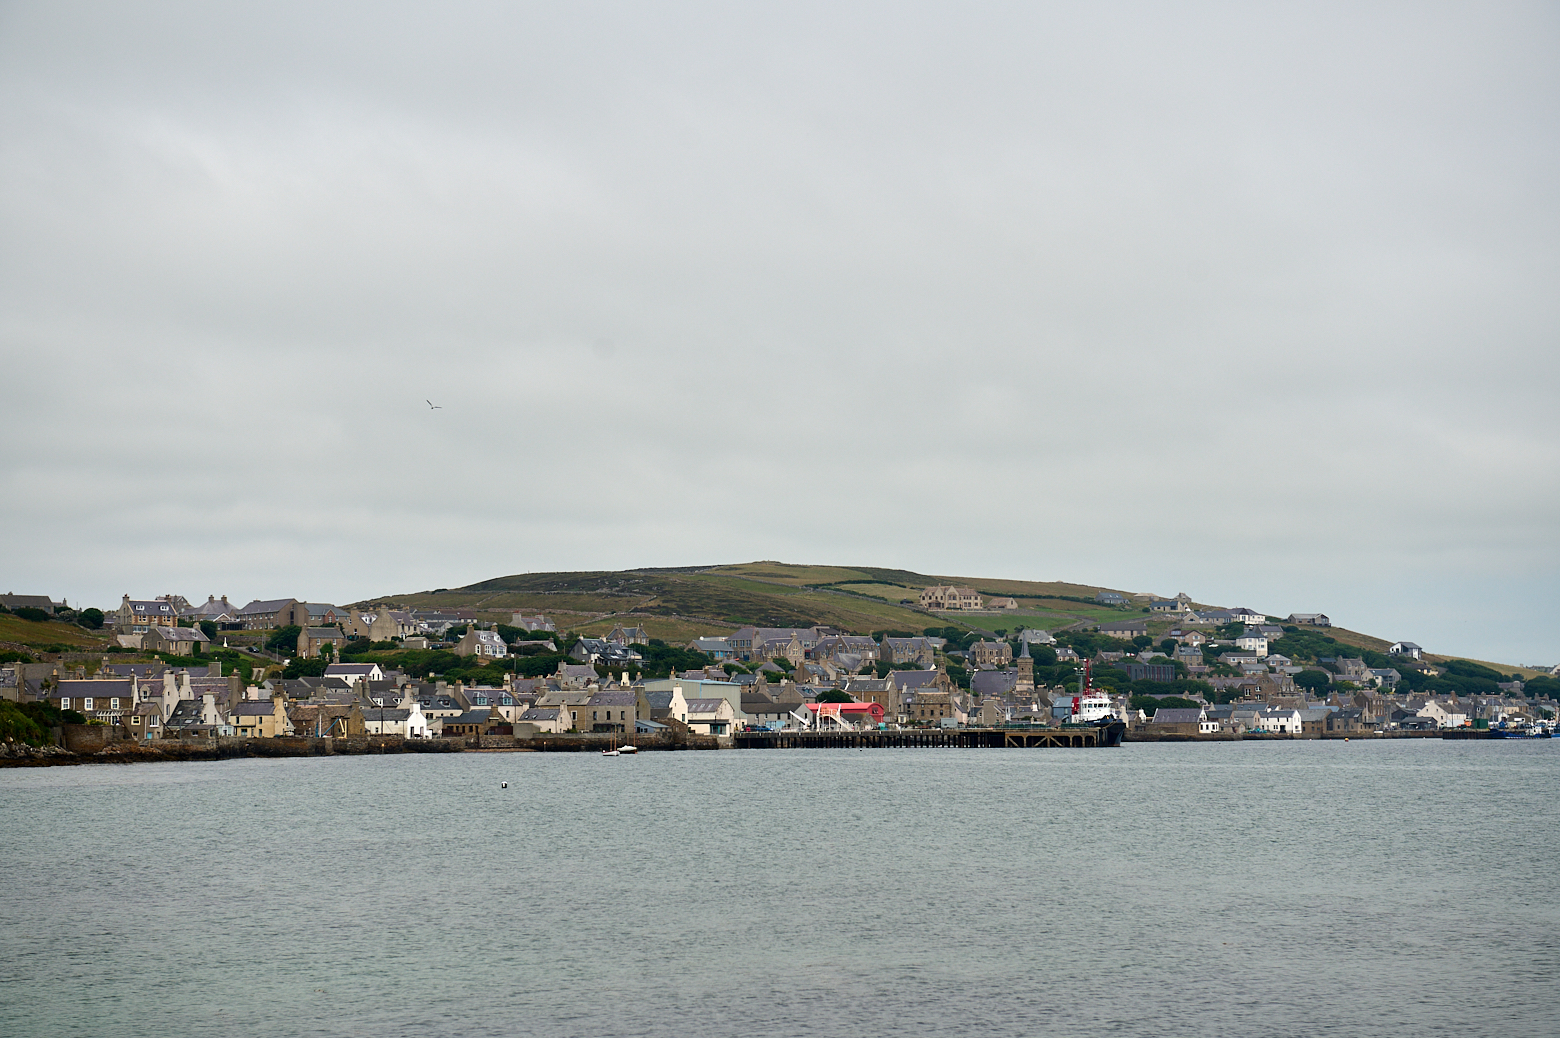 Walking from Stromness along the coast towards the Ness battery.